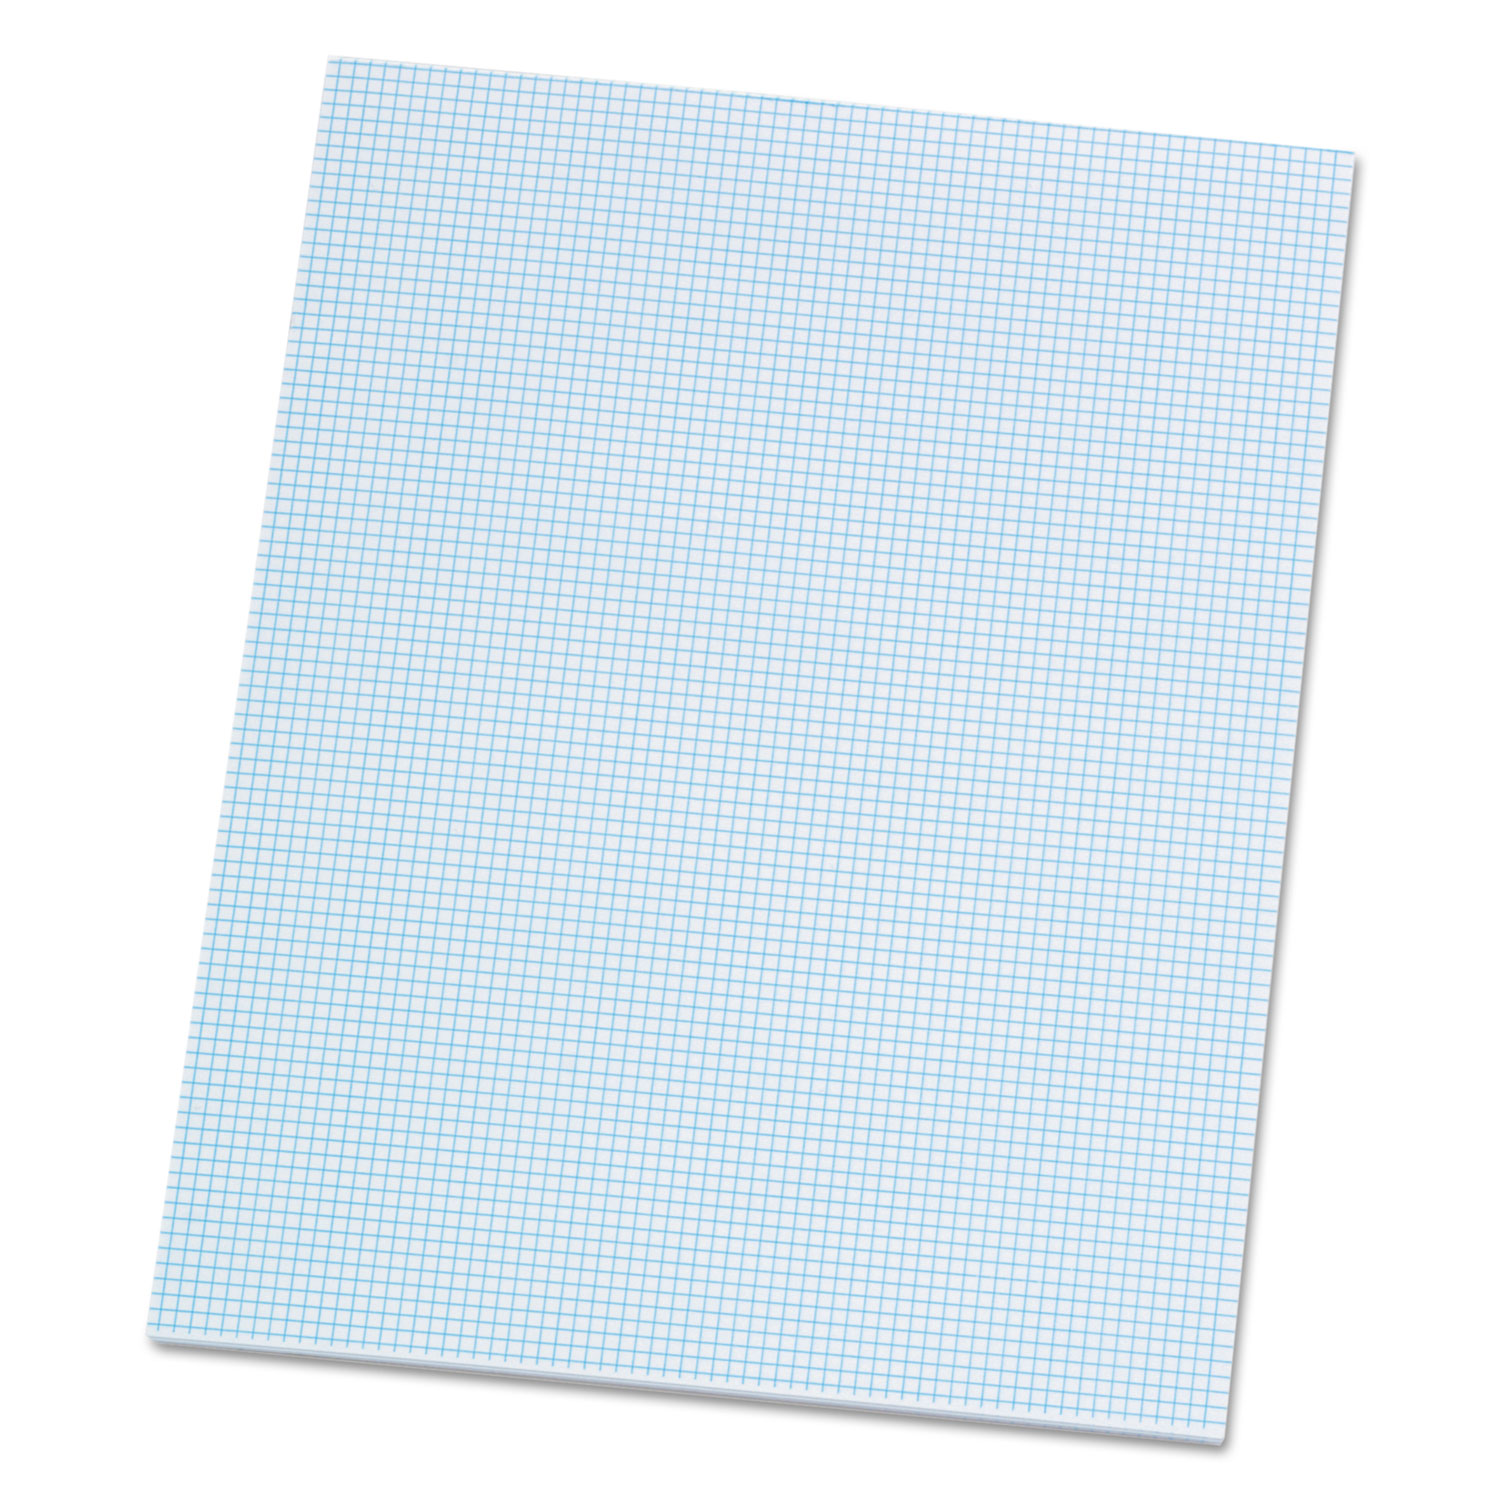  Ampad 22-005 Quadrille Pads, 8 sq/in Quadrille Rule, 8.5 x 11, White, 50 Sheets (TOP22005) 